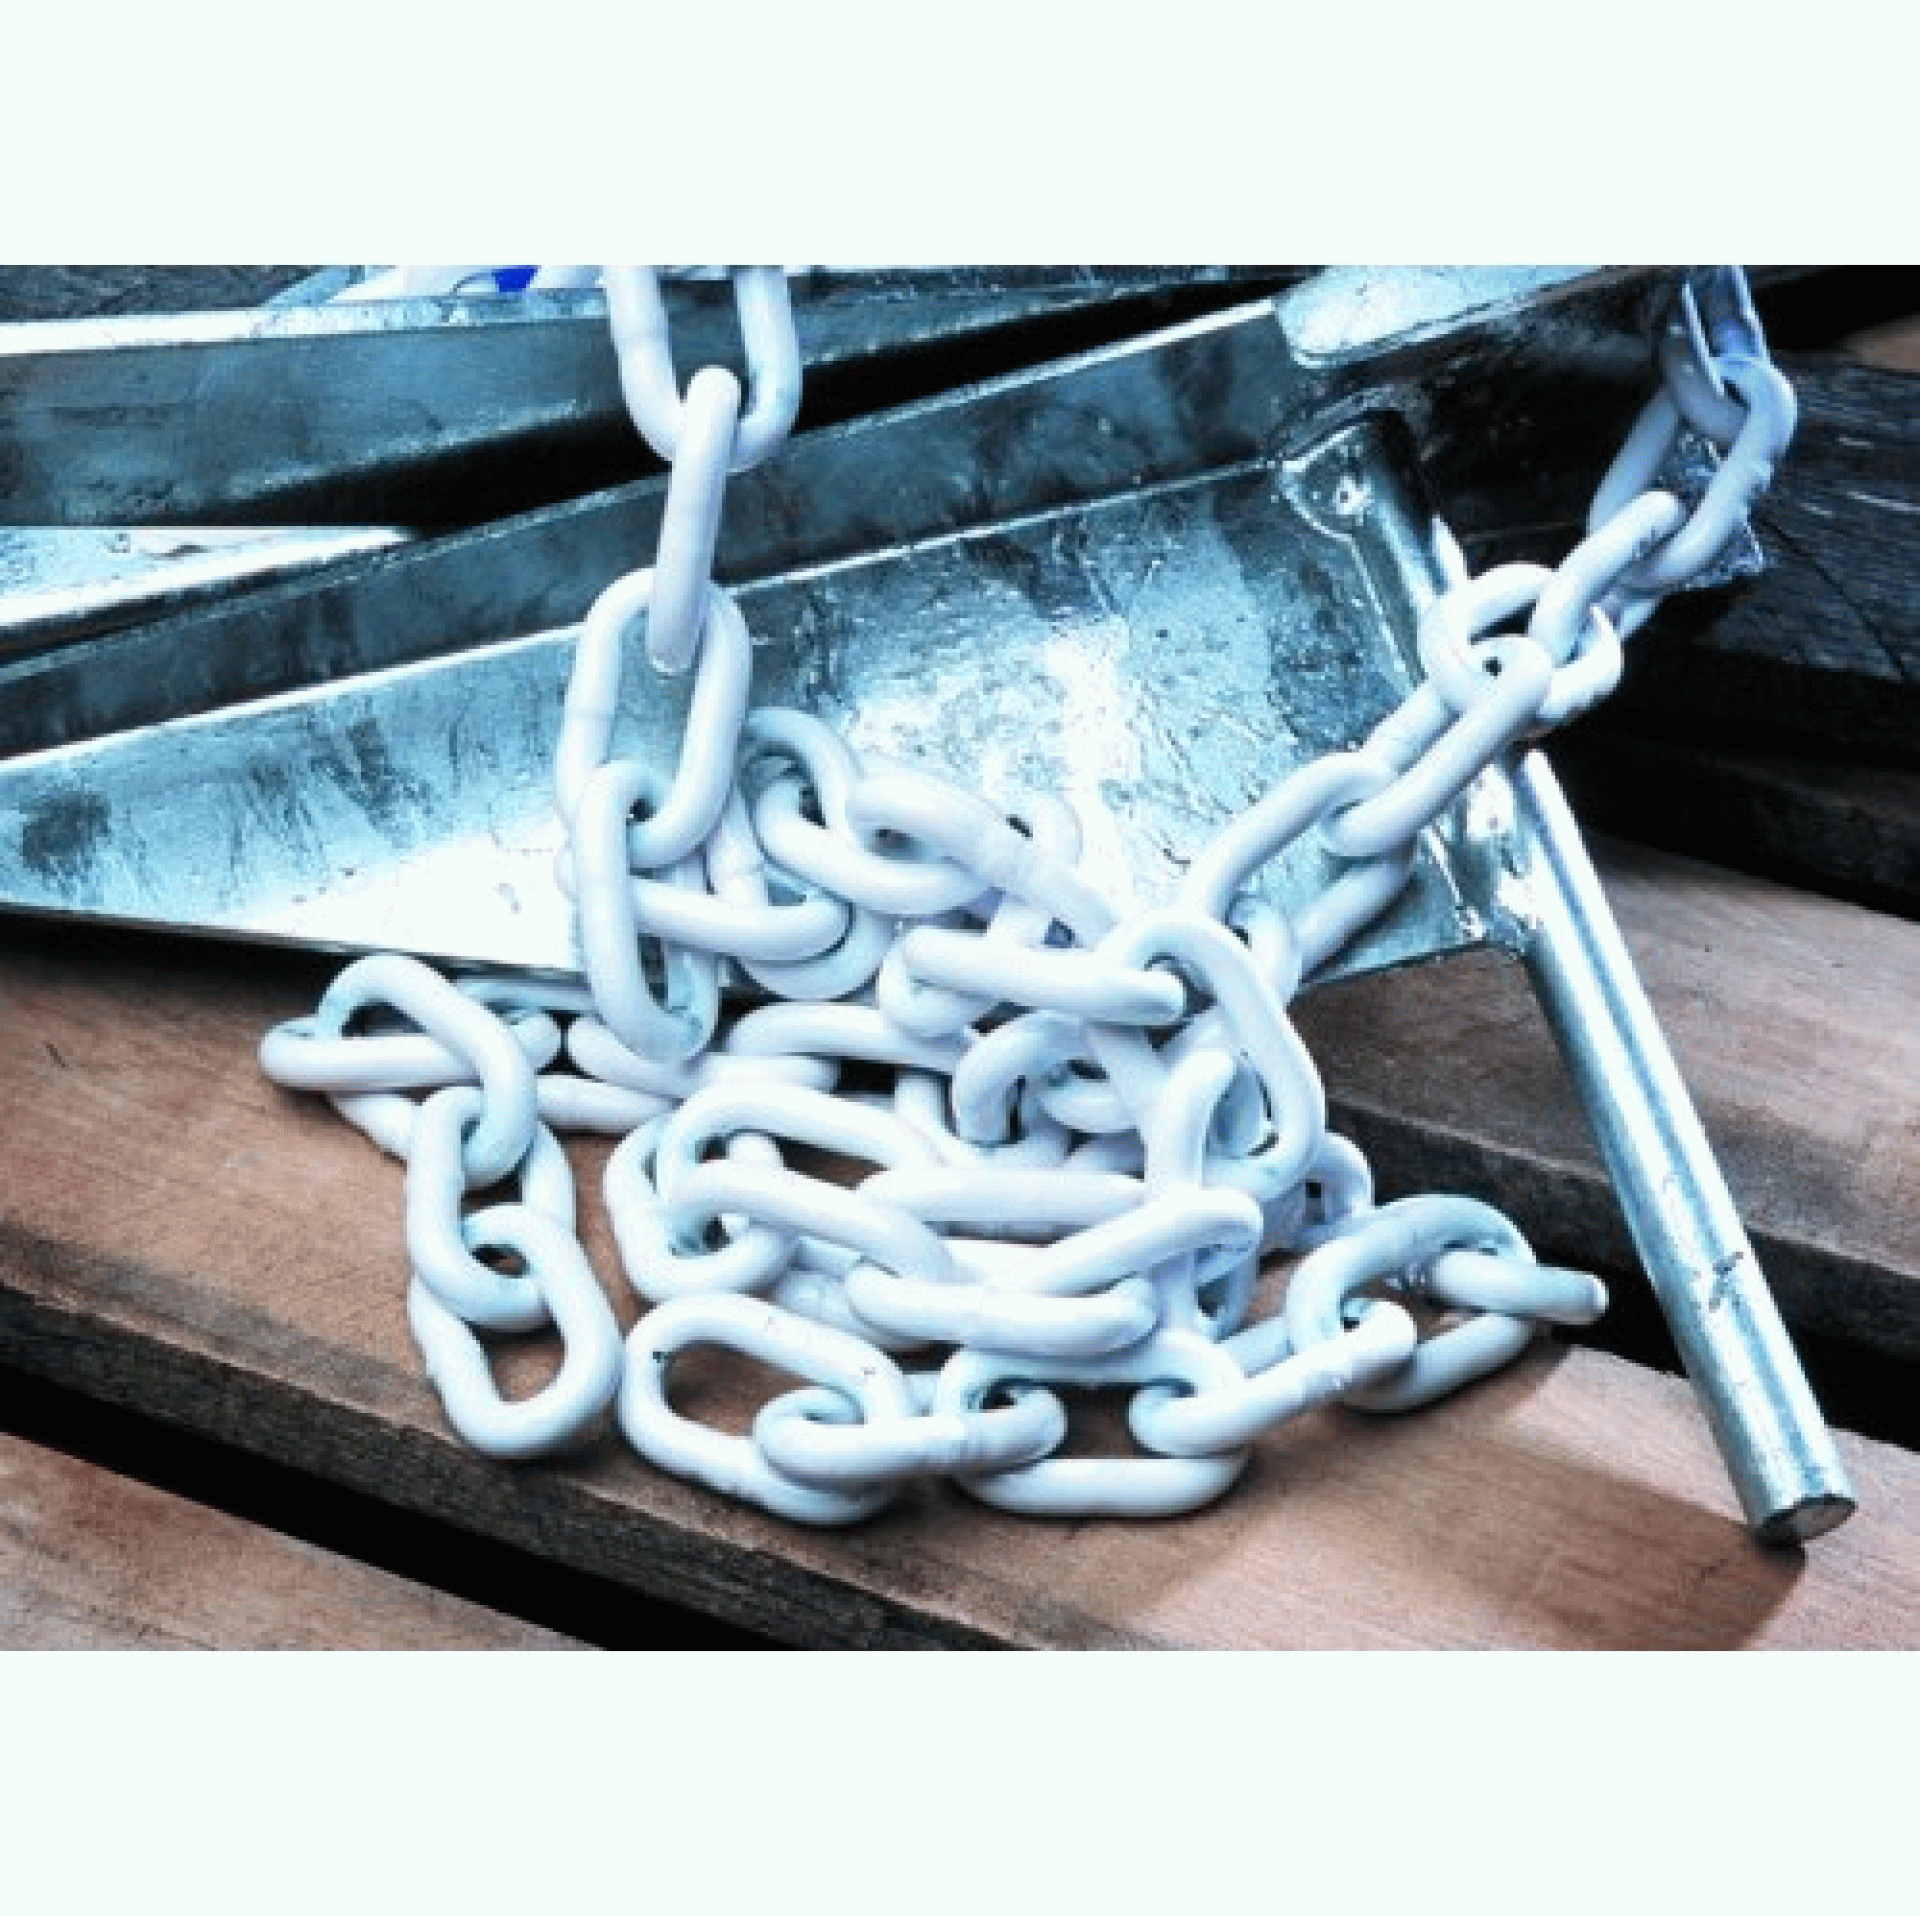 ANCHOR CHAIN - 1/4" X 4' - POLYMER COATED W/SHACKLE